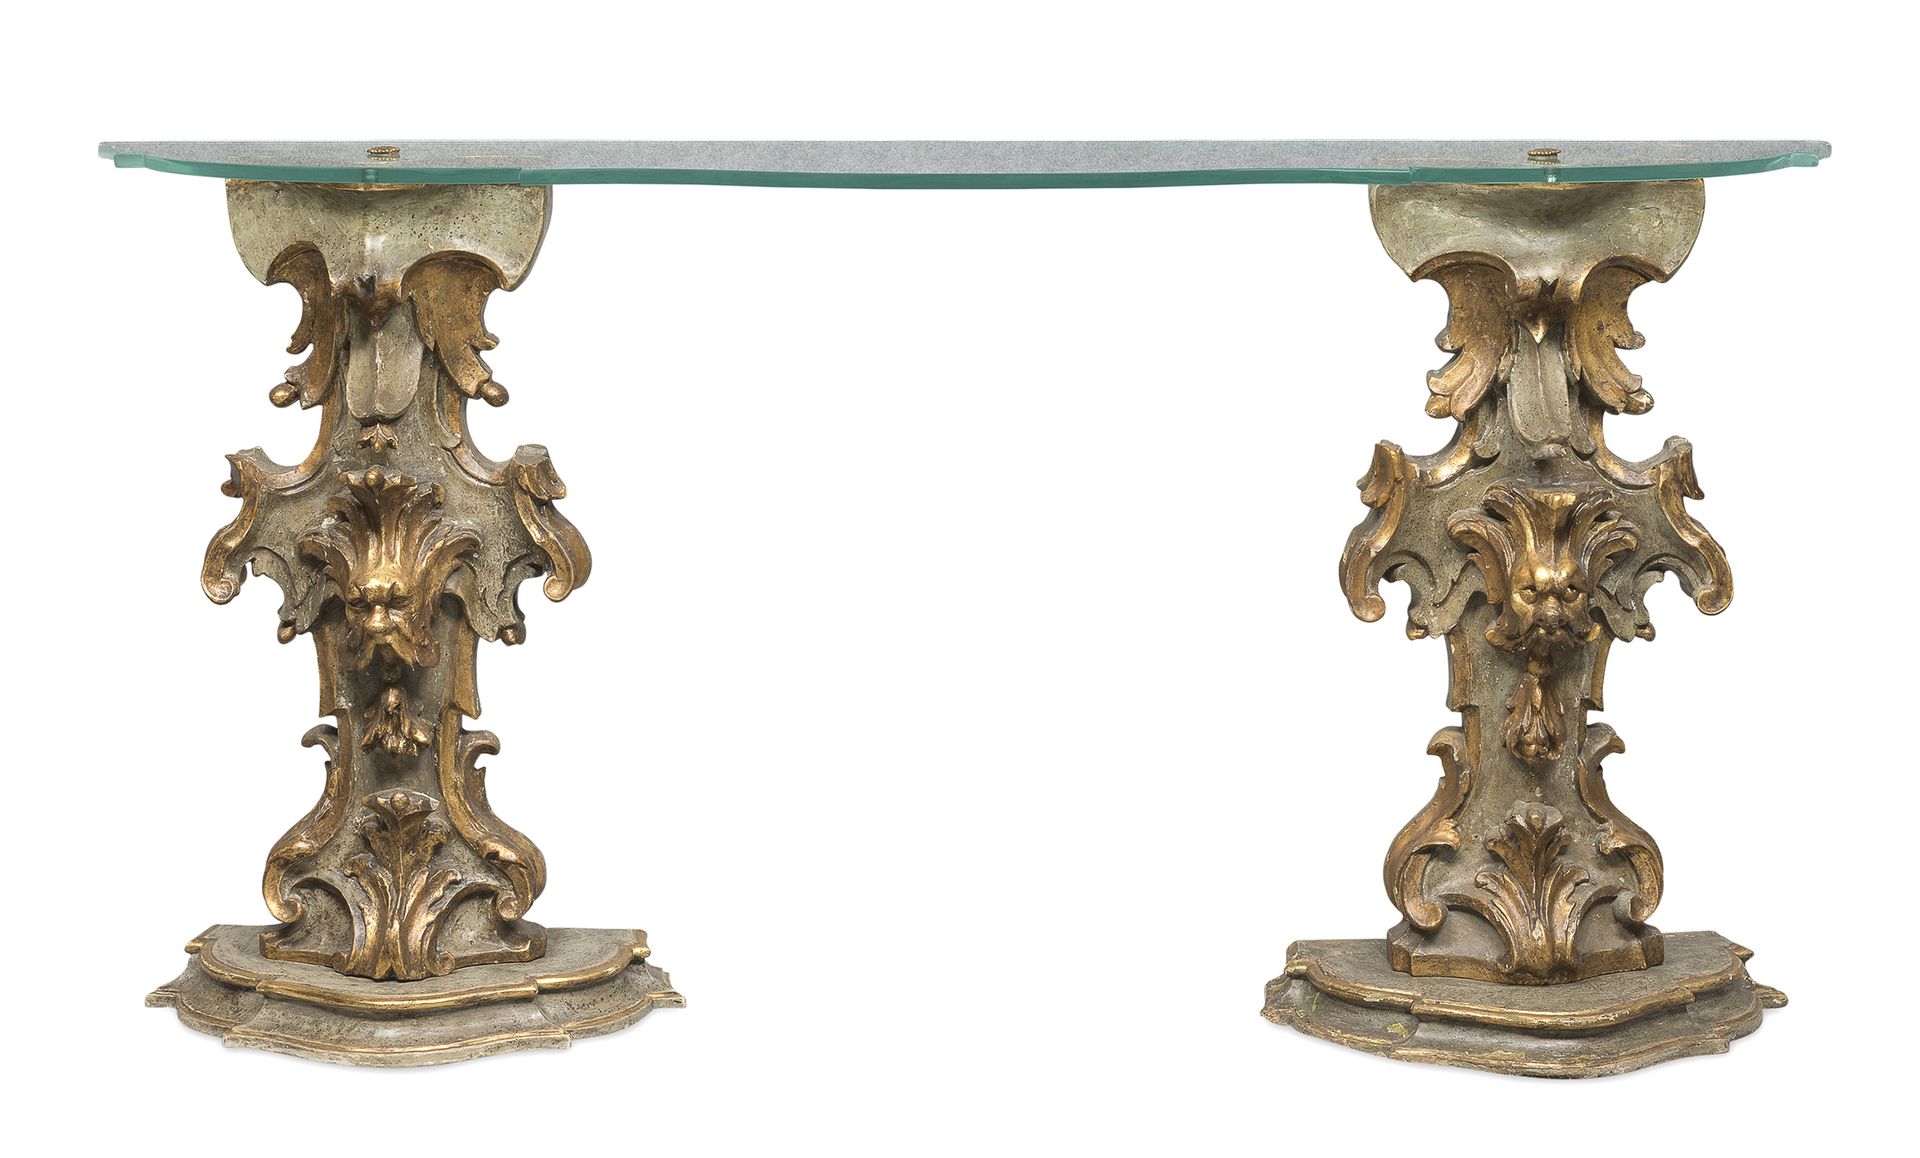 Null CONSOLE, ELEMENTS OF THE BAROQUE PERIOD